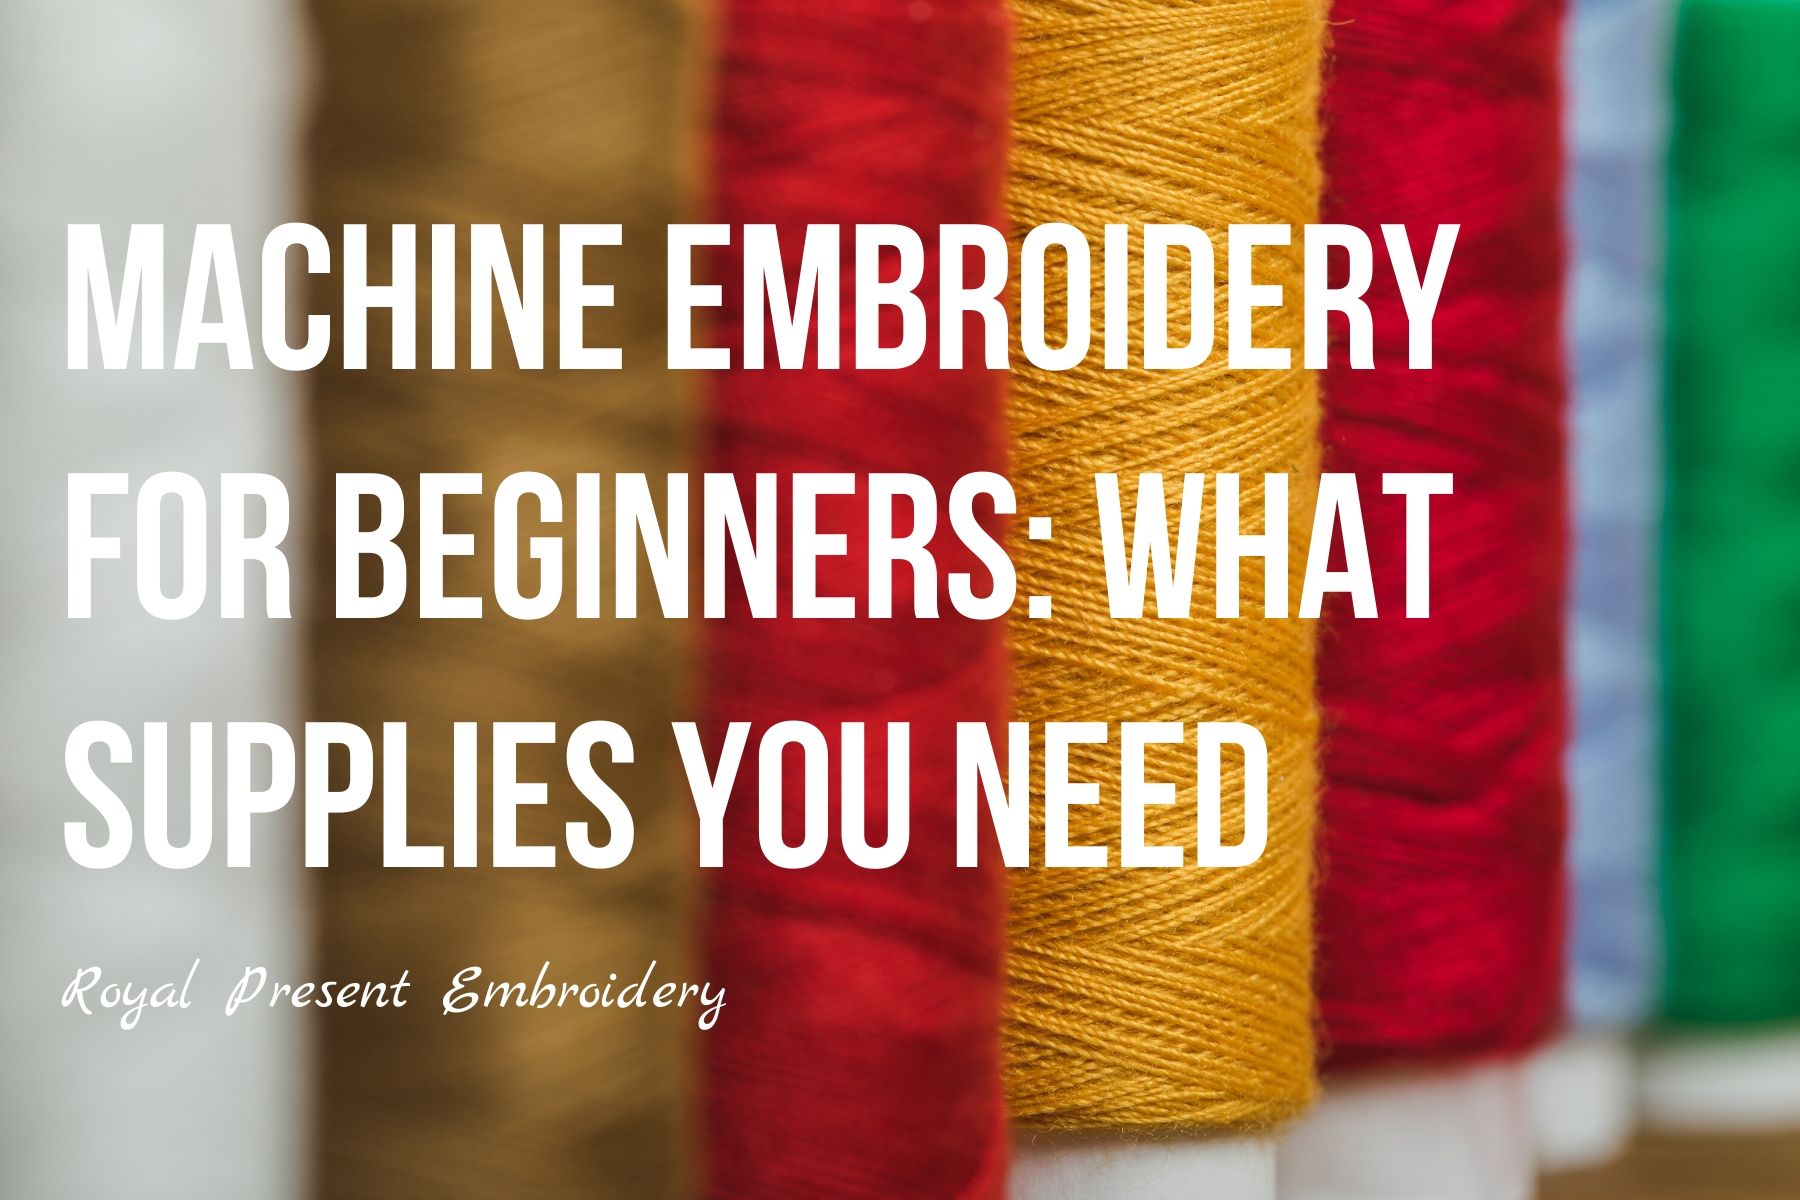 Ever wondered what supplies are needed to create an embroidery